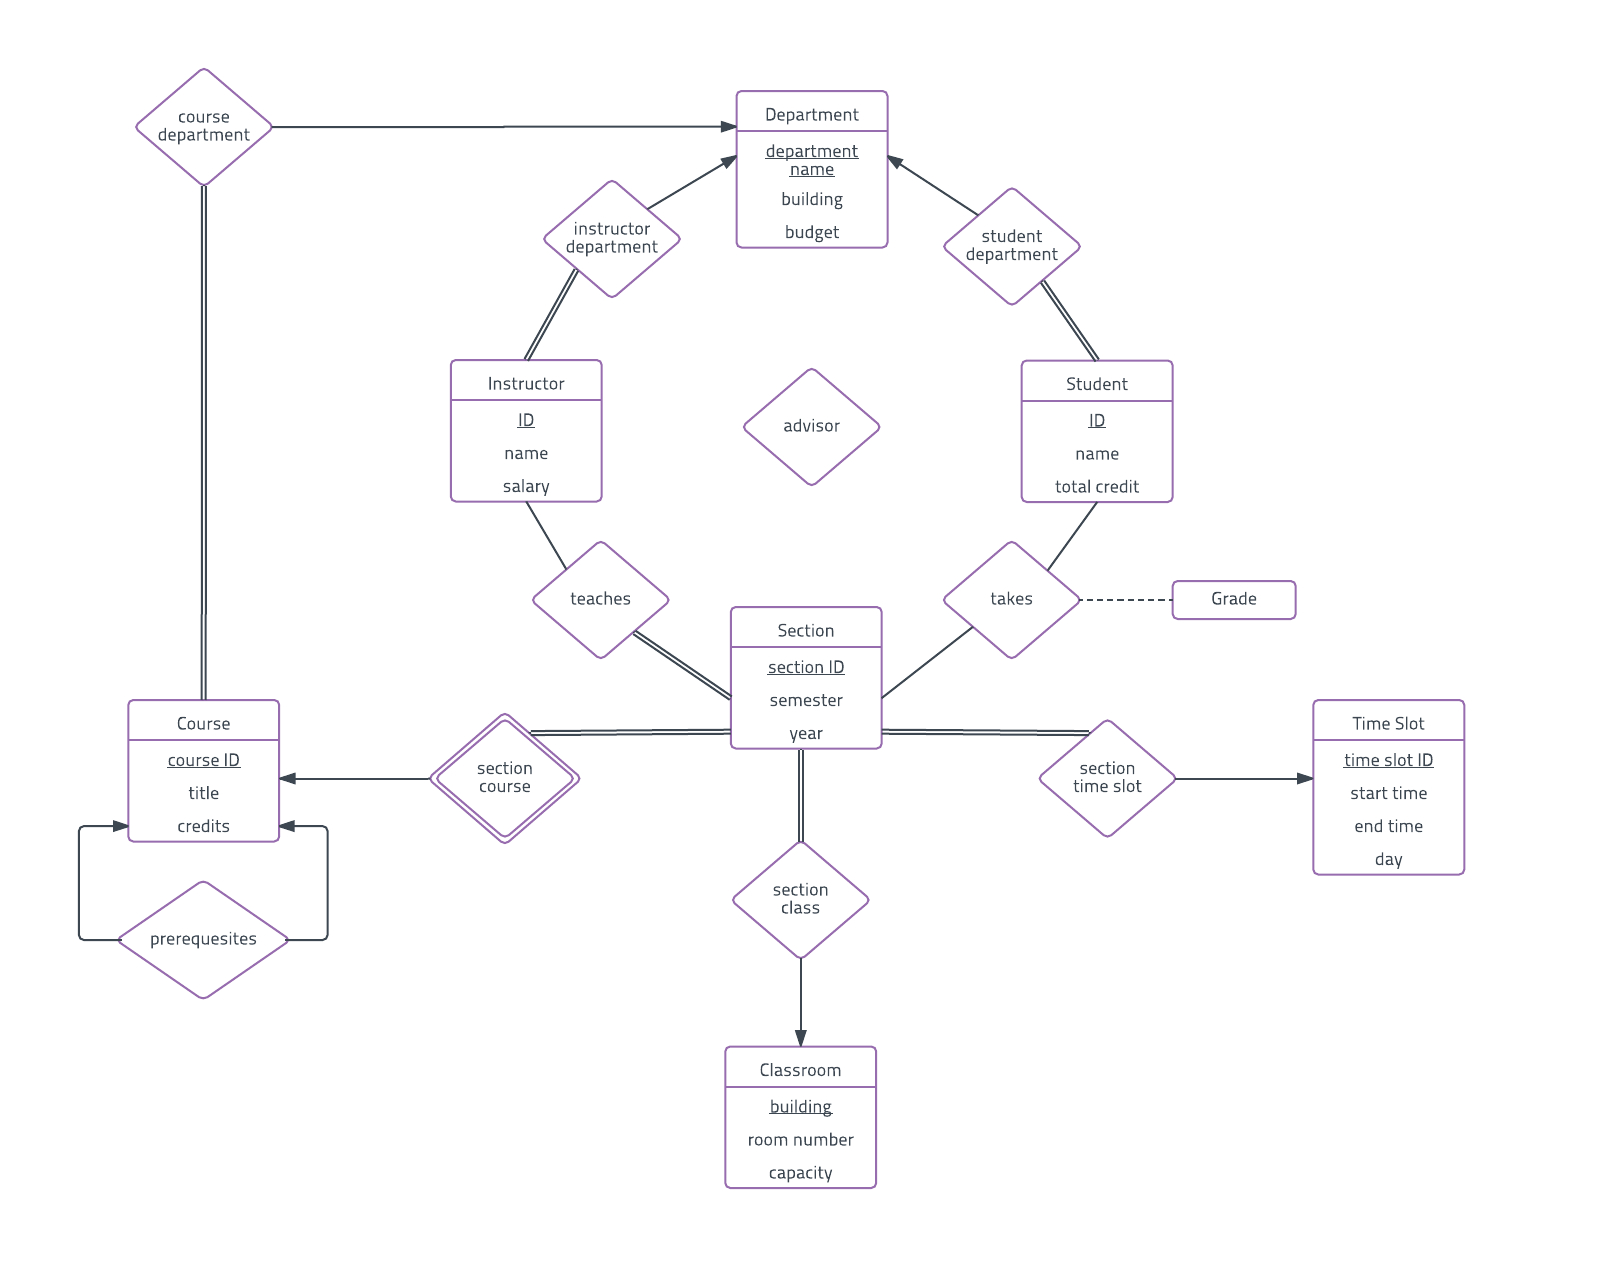 Er Diagram Examples And Templates | Lucidchart intended for Examples Of Er Diagram With Solution